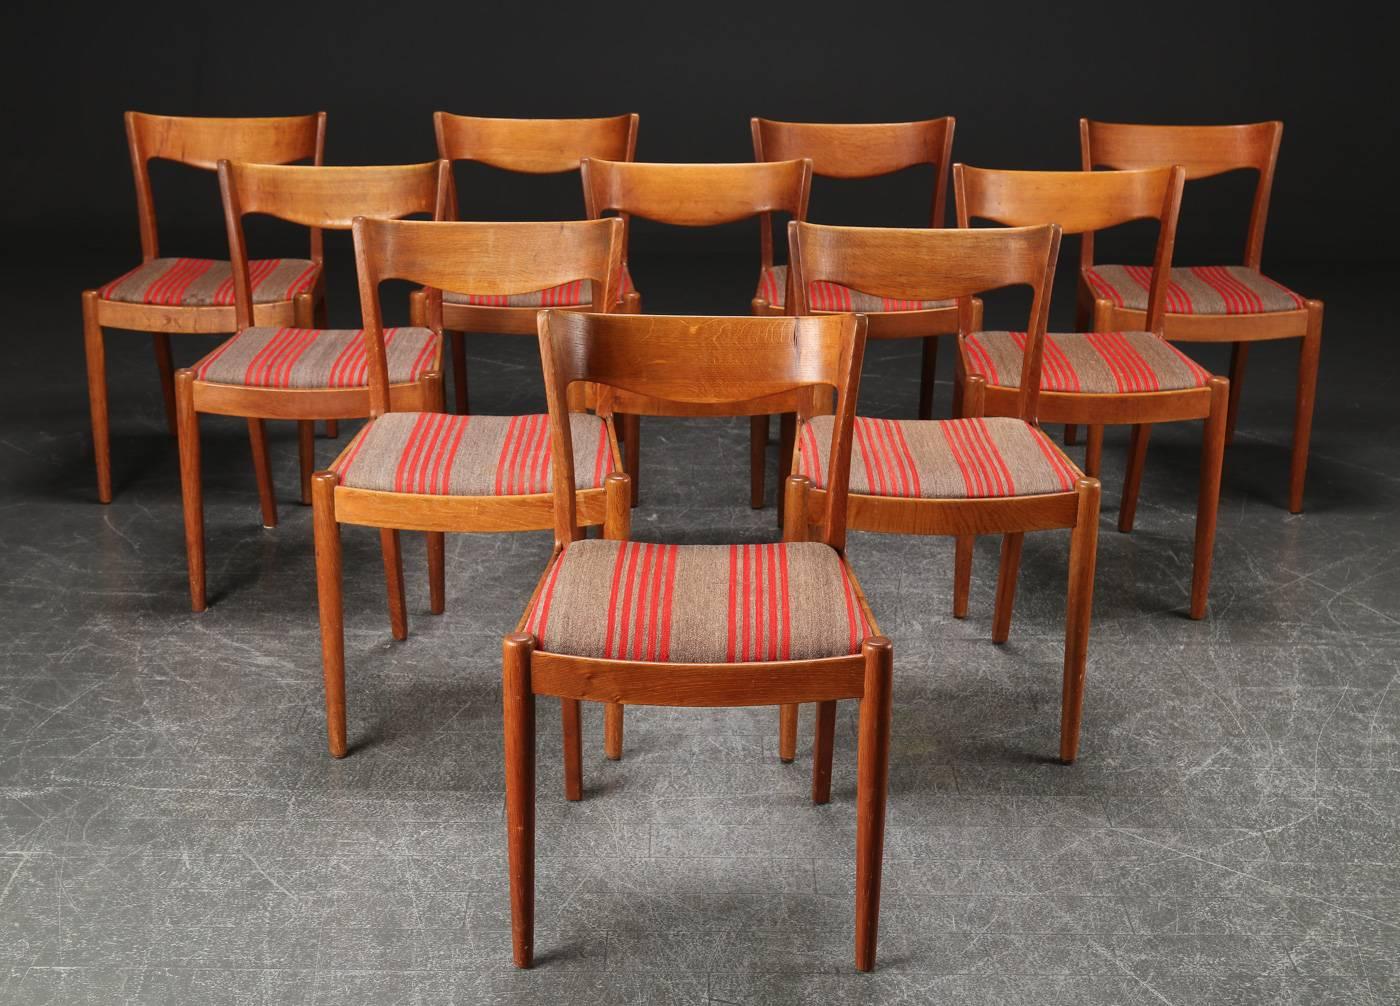 A rare set of ten dining chairs designed in the 1950s by Ib Kofod-Larsen for Slagelse Møbelværk.

The chairs are in good condition and has well designed shapes from the 1950s, with lots of the desirable patina that only age can give to a chair and